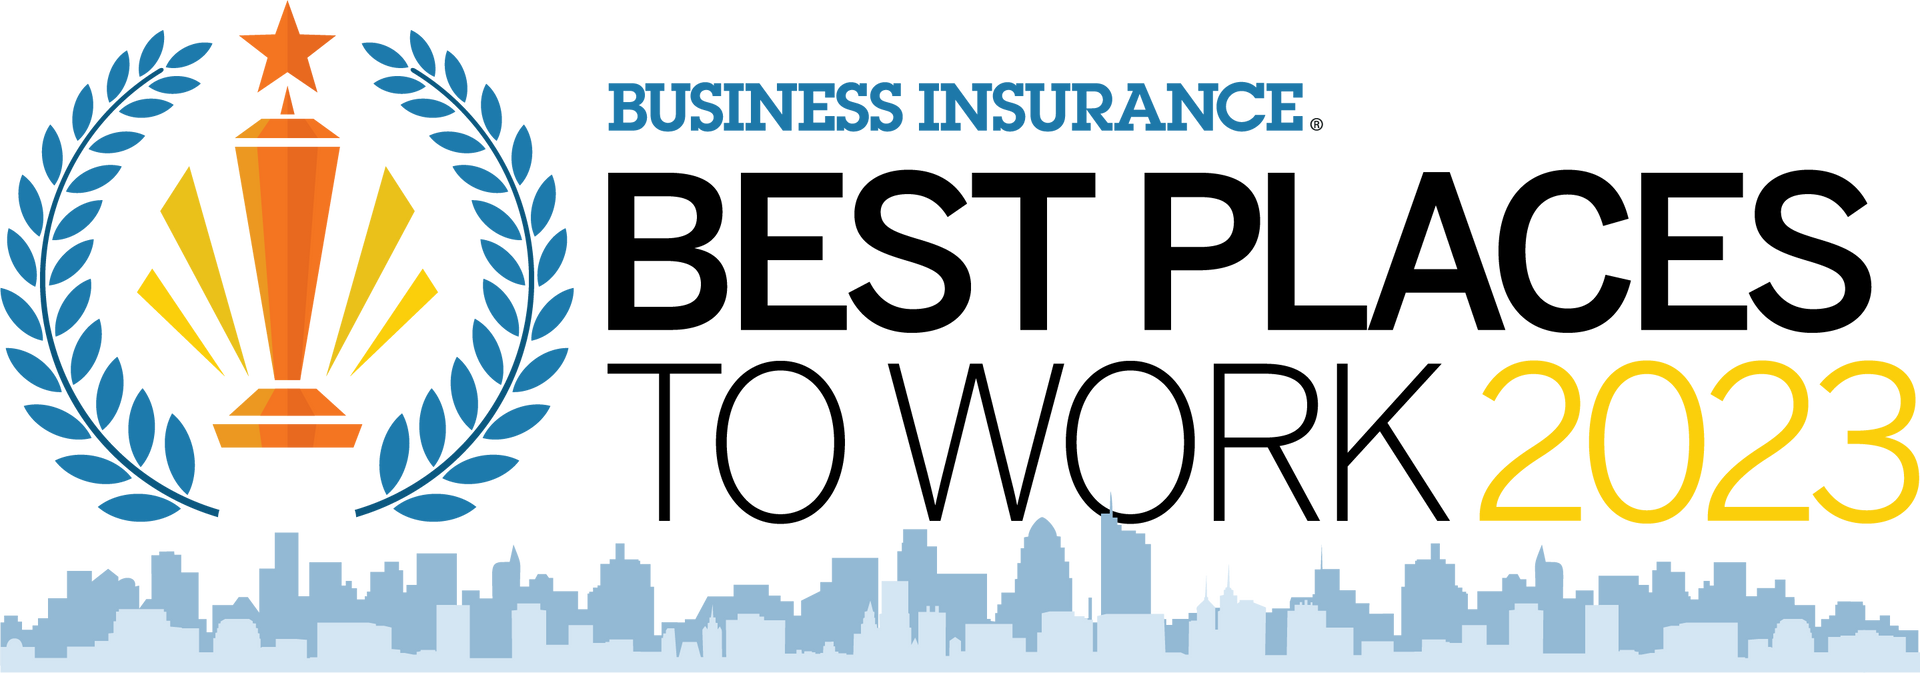 business insurance best places to work 2023